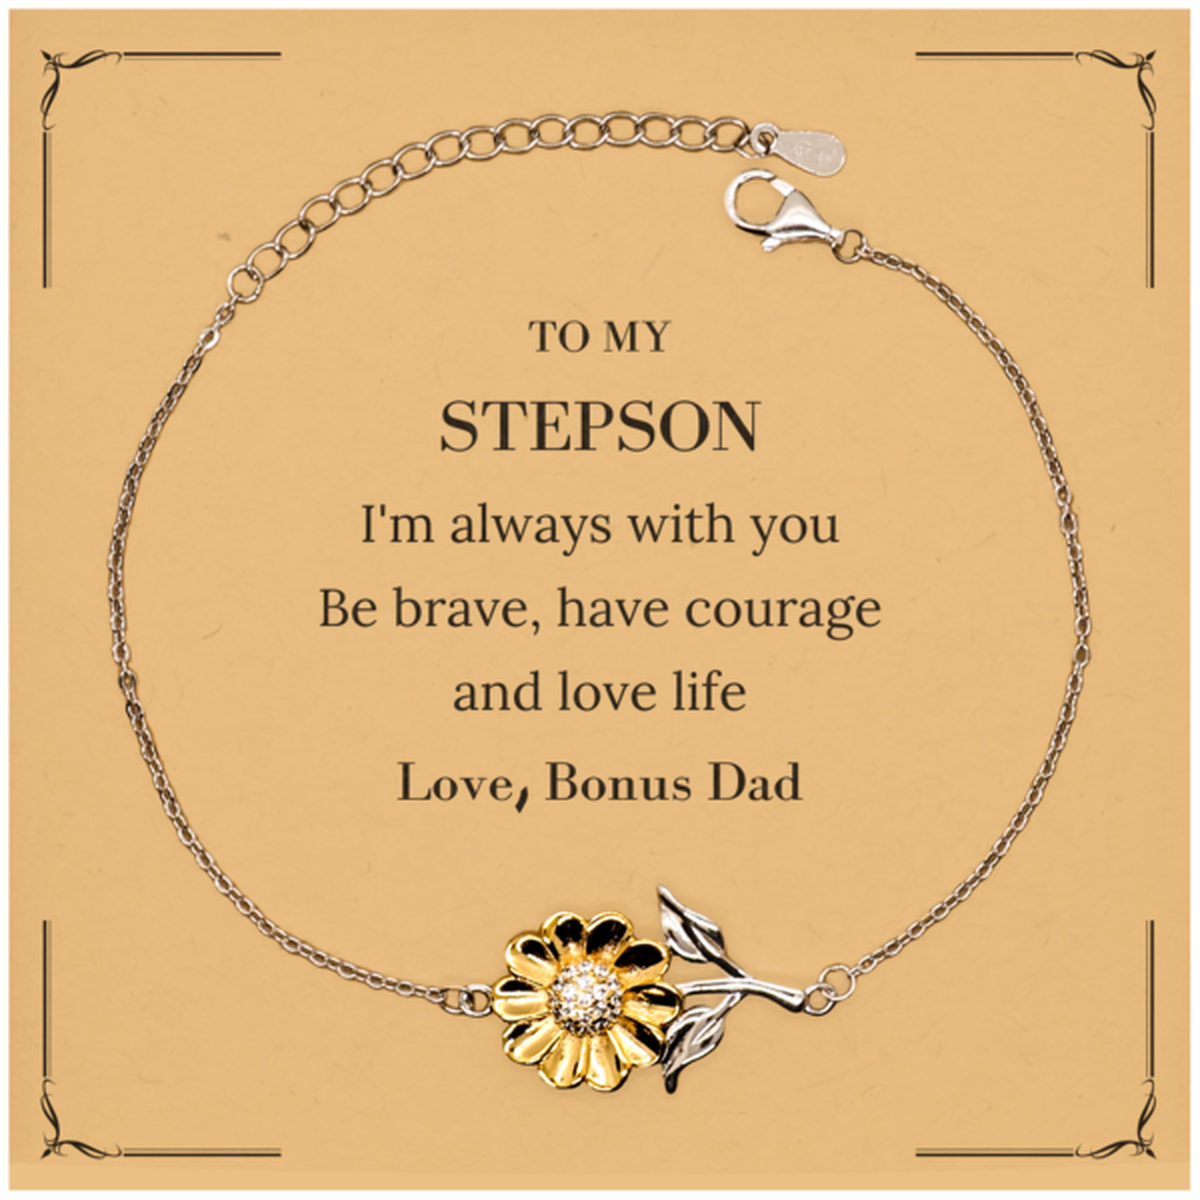 To My Stepson Gifts from Bonus Dad, Unique Sunflower Bracelet Inspirational Christmas Birthday Graduation Gifts for Stepson I'm always with you. Be brave, have courage and love life. Love, Bonus Dad